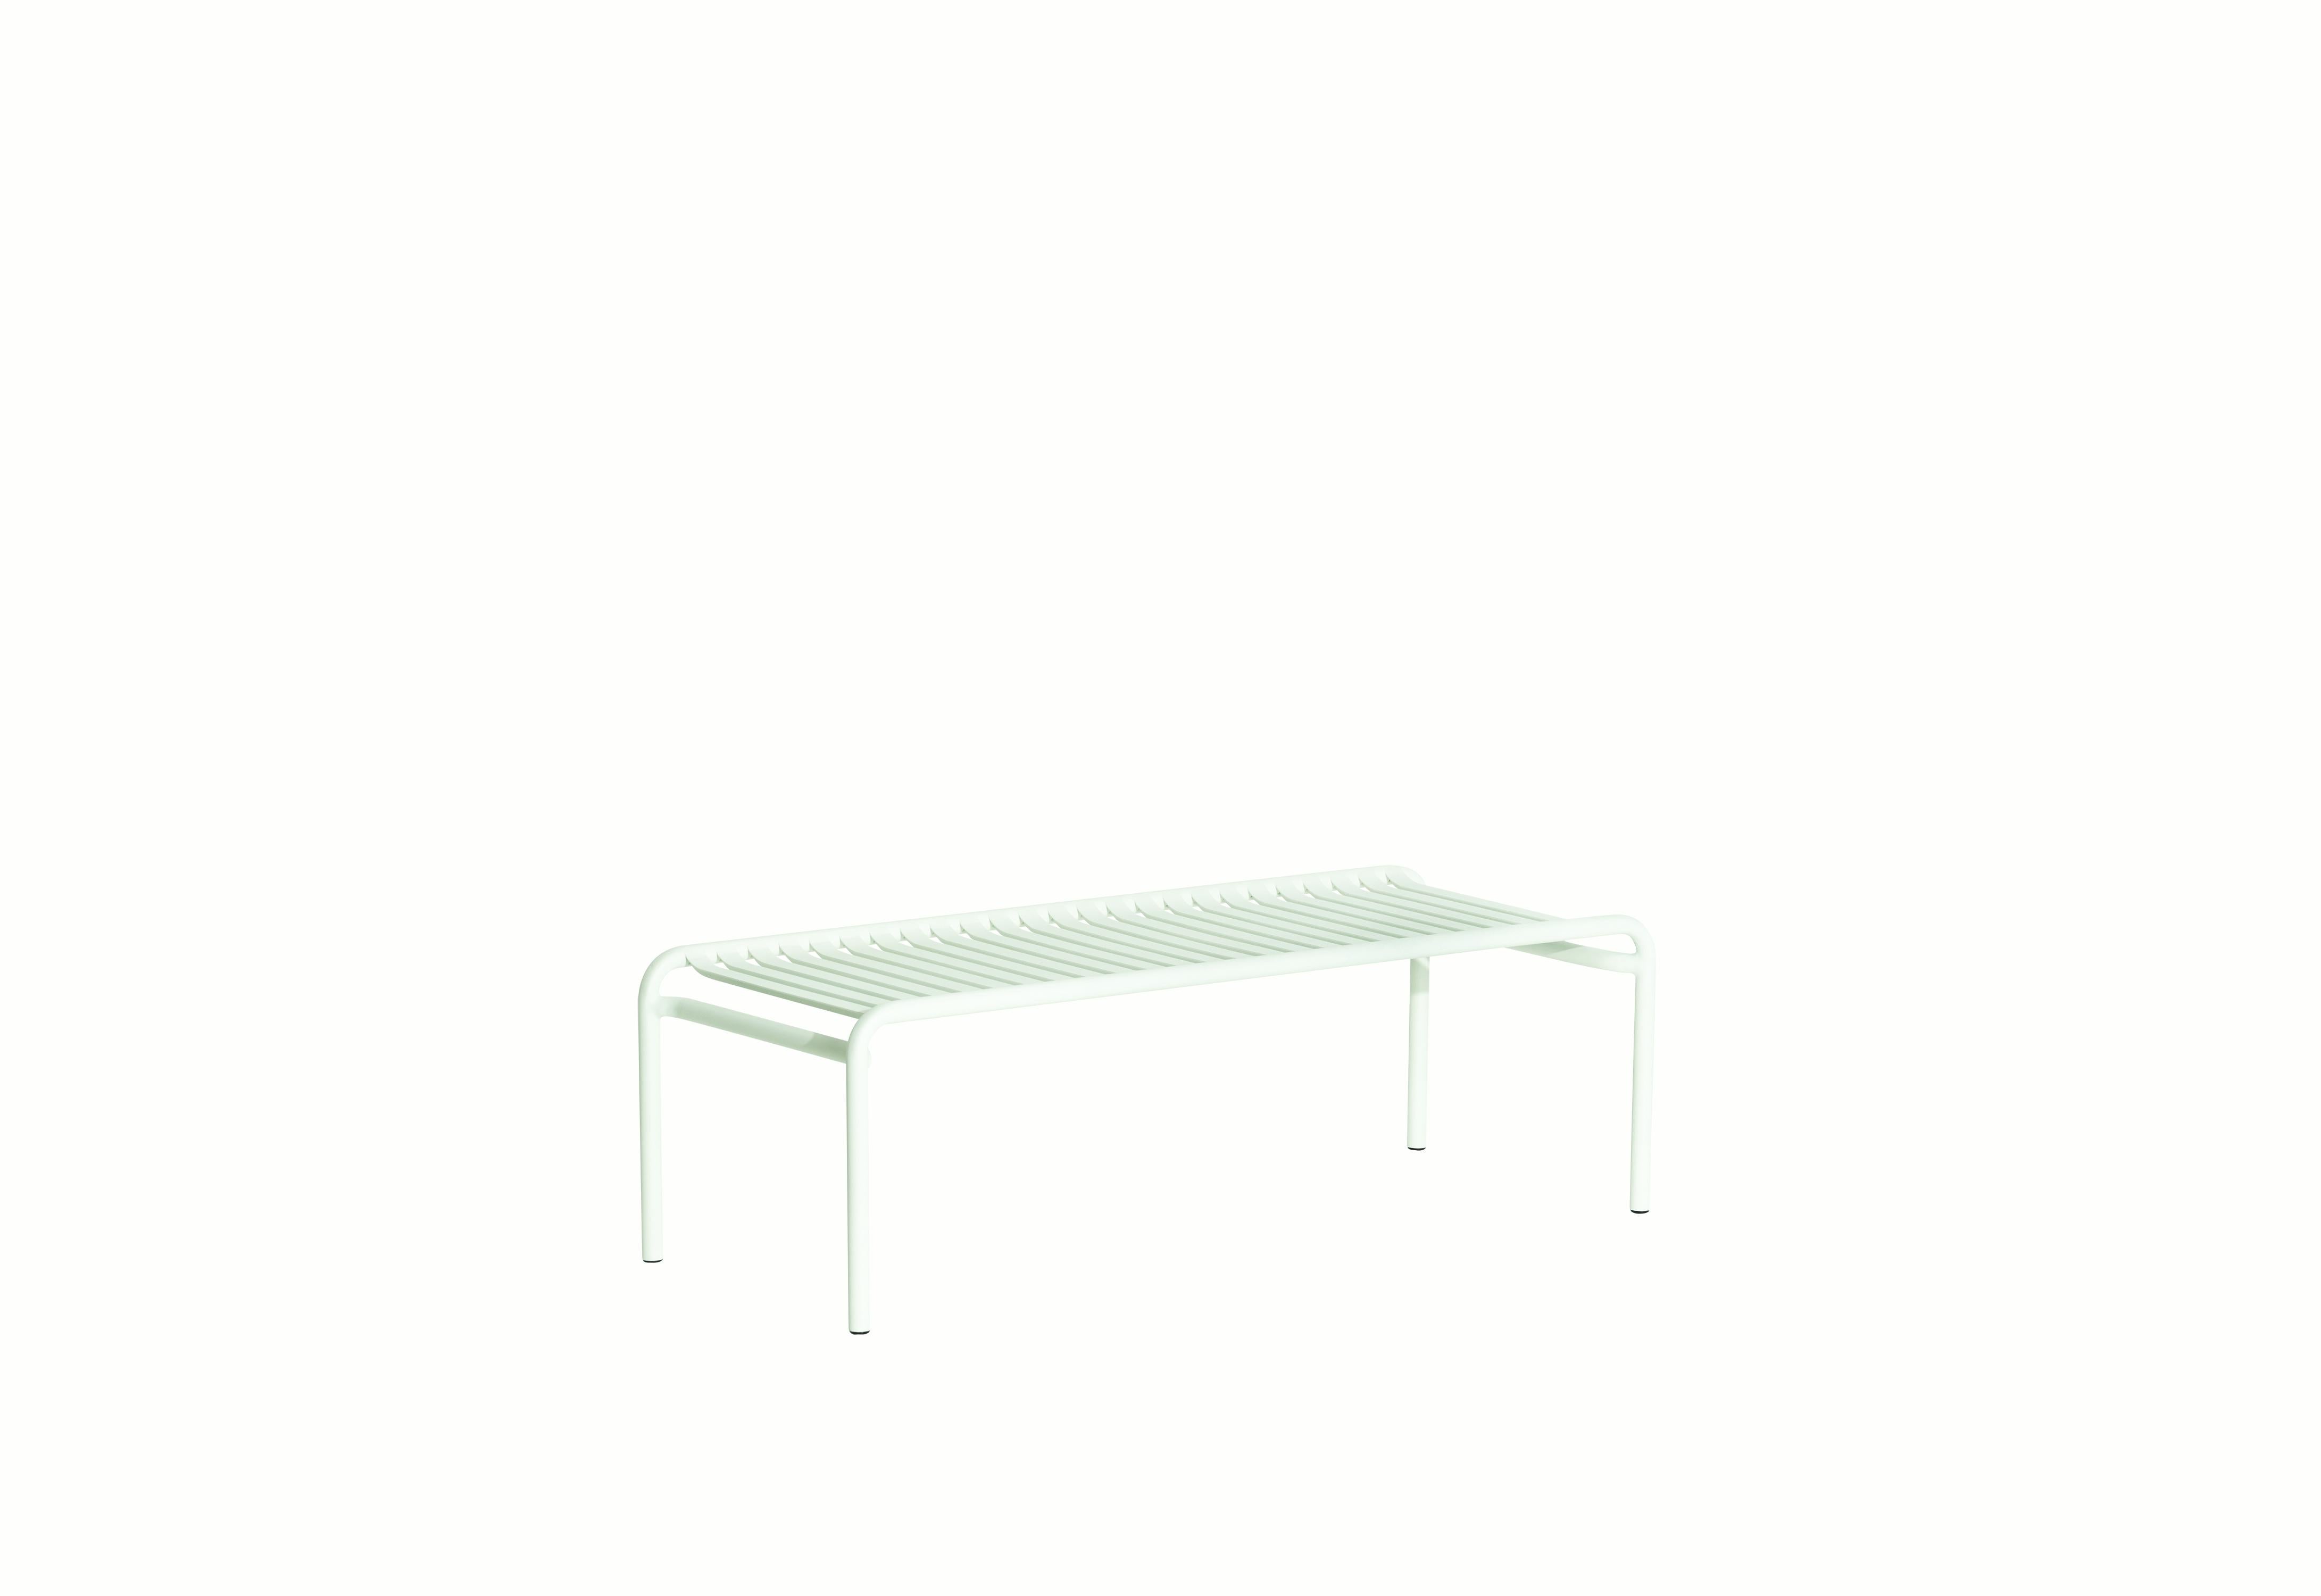 Petite Friture Week-End Long Coffee Table in White Aluminium by Studio BrichetZiegler, 2017

The week-end collection is a full range of outdoor furniture, in aluminium grained epoxy paint, matt finish, that includes 18 functions and 8 colours for